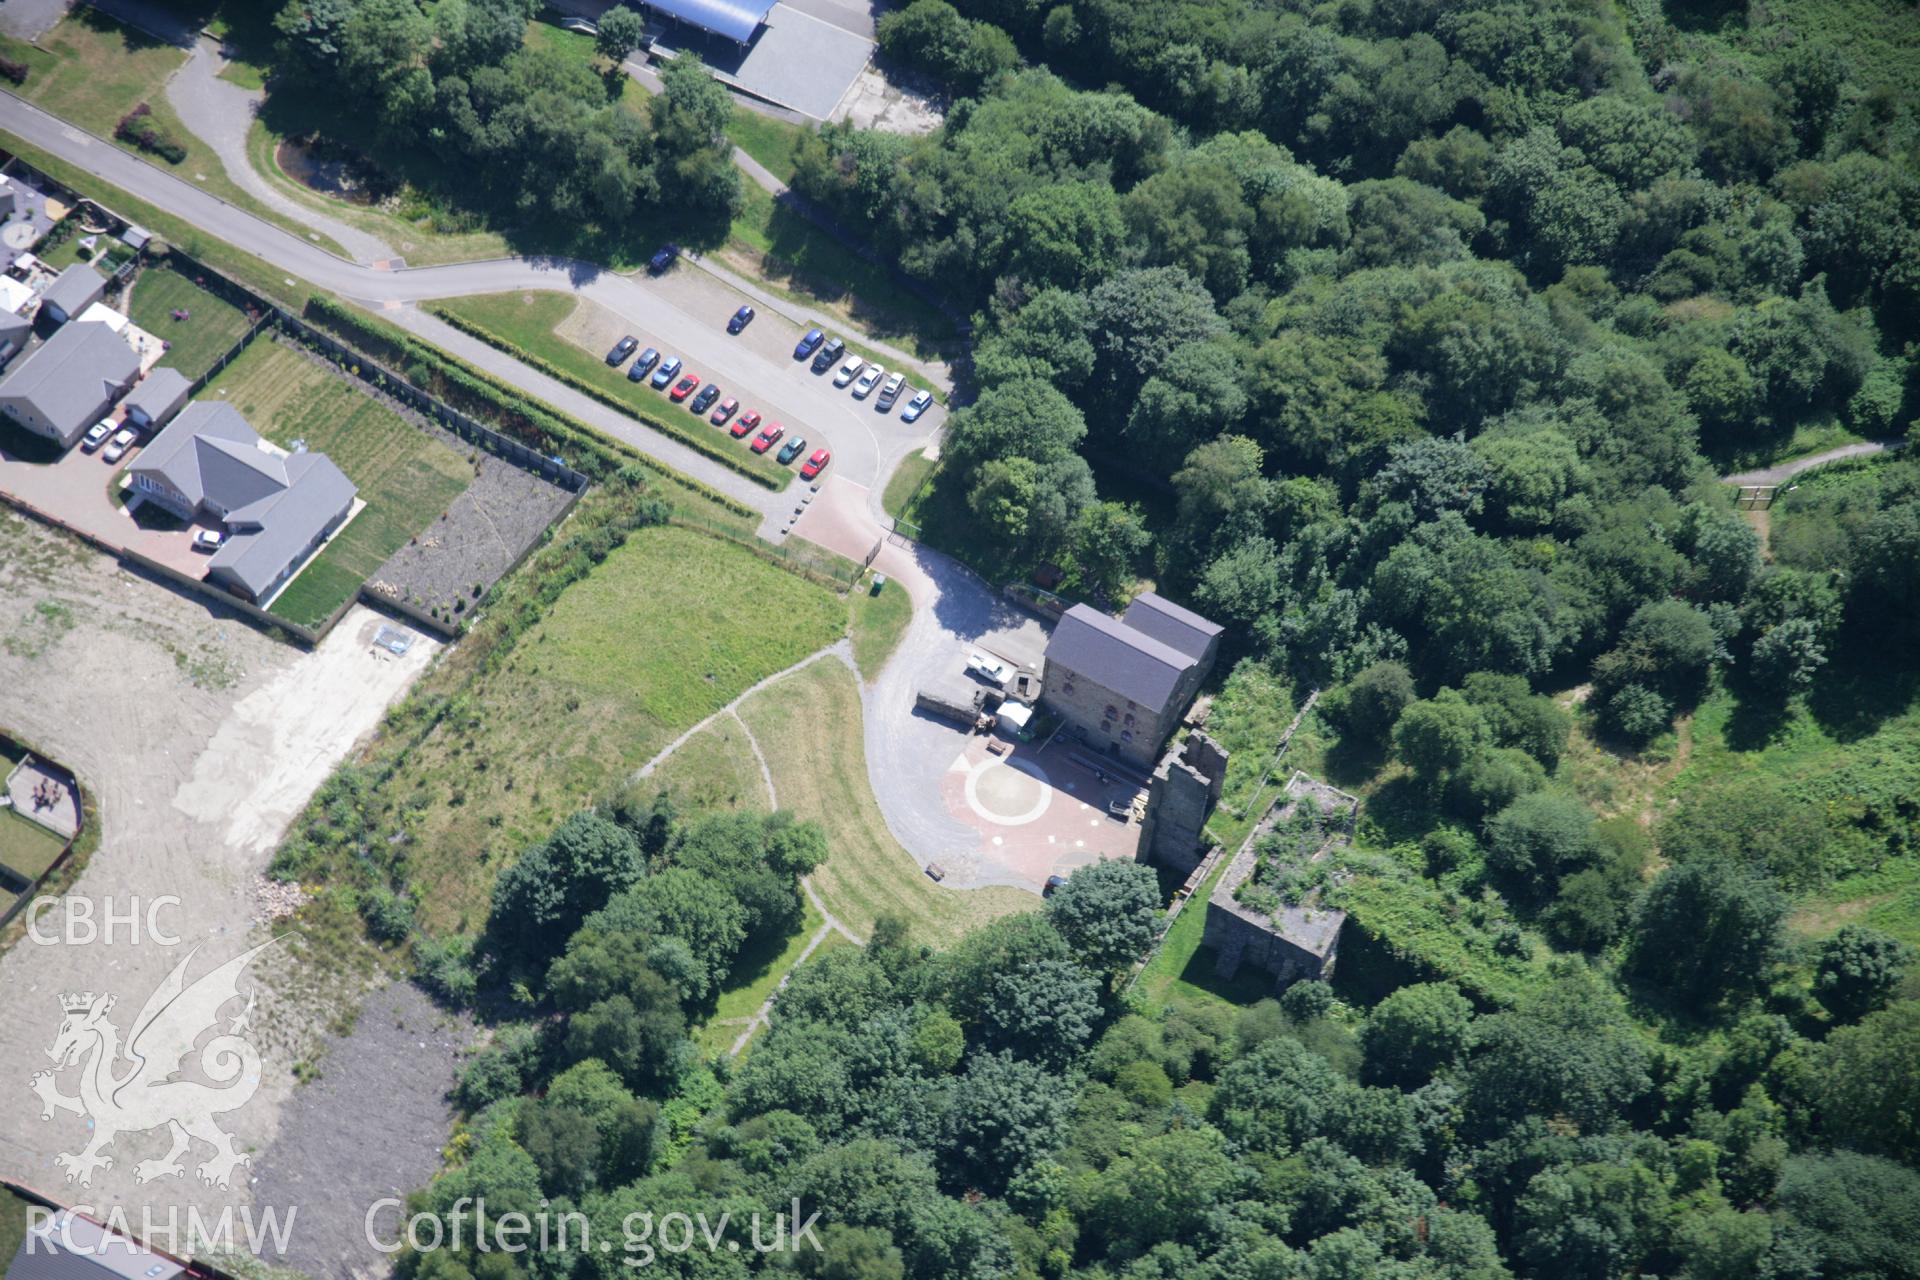 RCAHMW colour oblique aerial photograph of Tondu Ironworks. Taken on 24 July 2006 by Toby Driver.